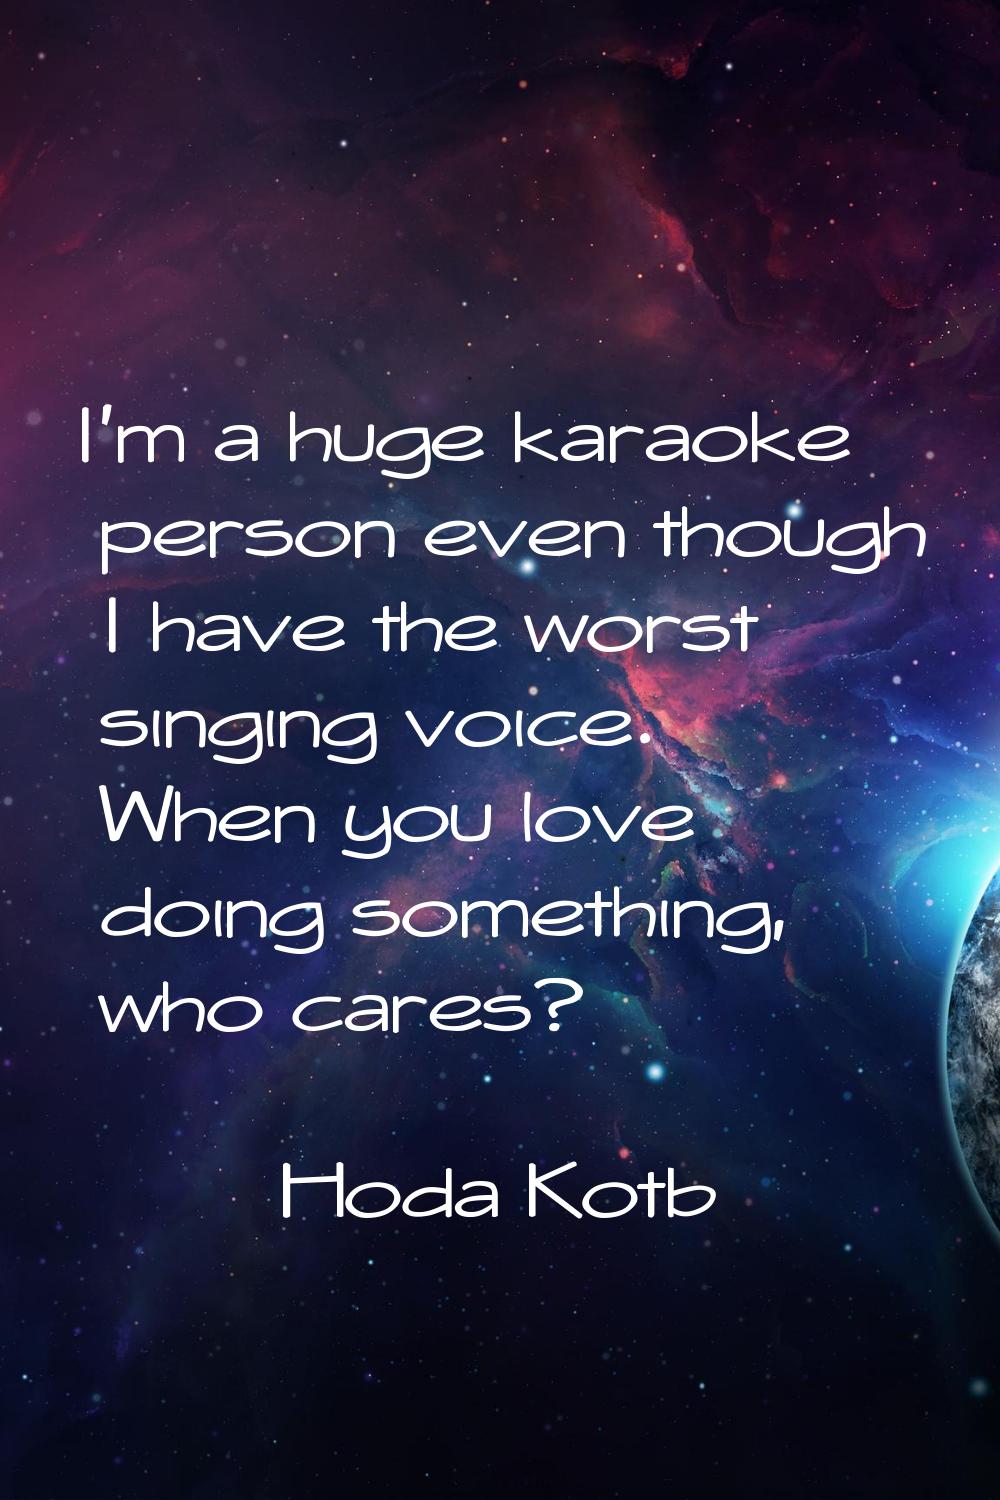 I'm a huge karaoke person even though I have the worst singing voice. When you love doing something